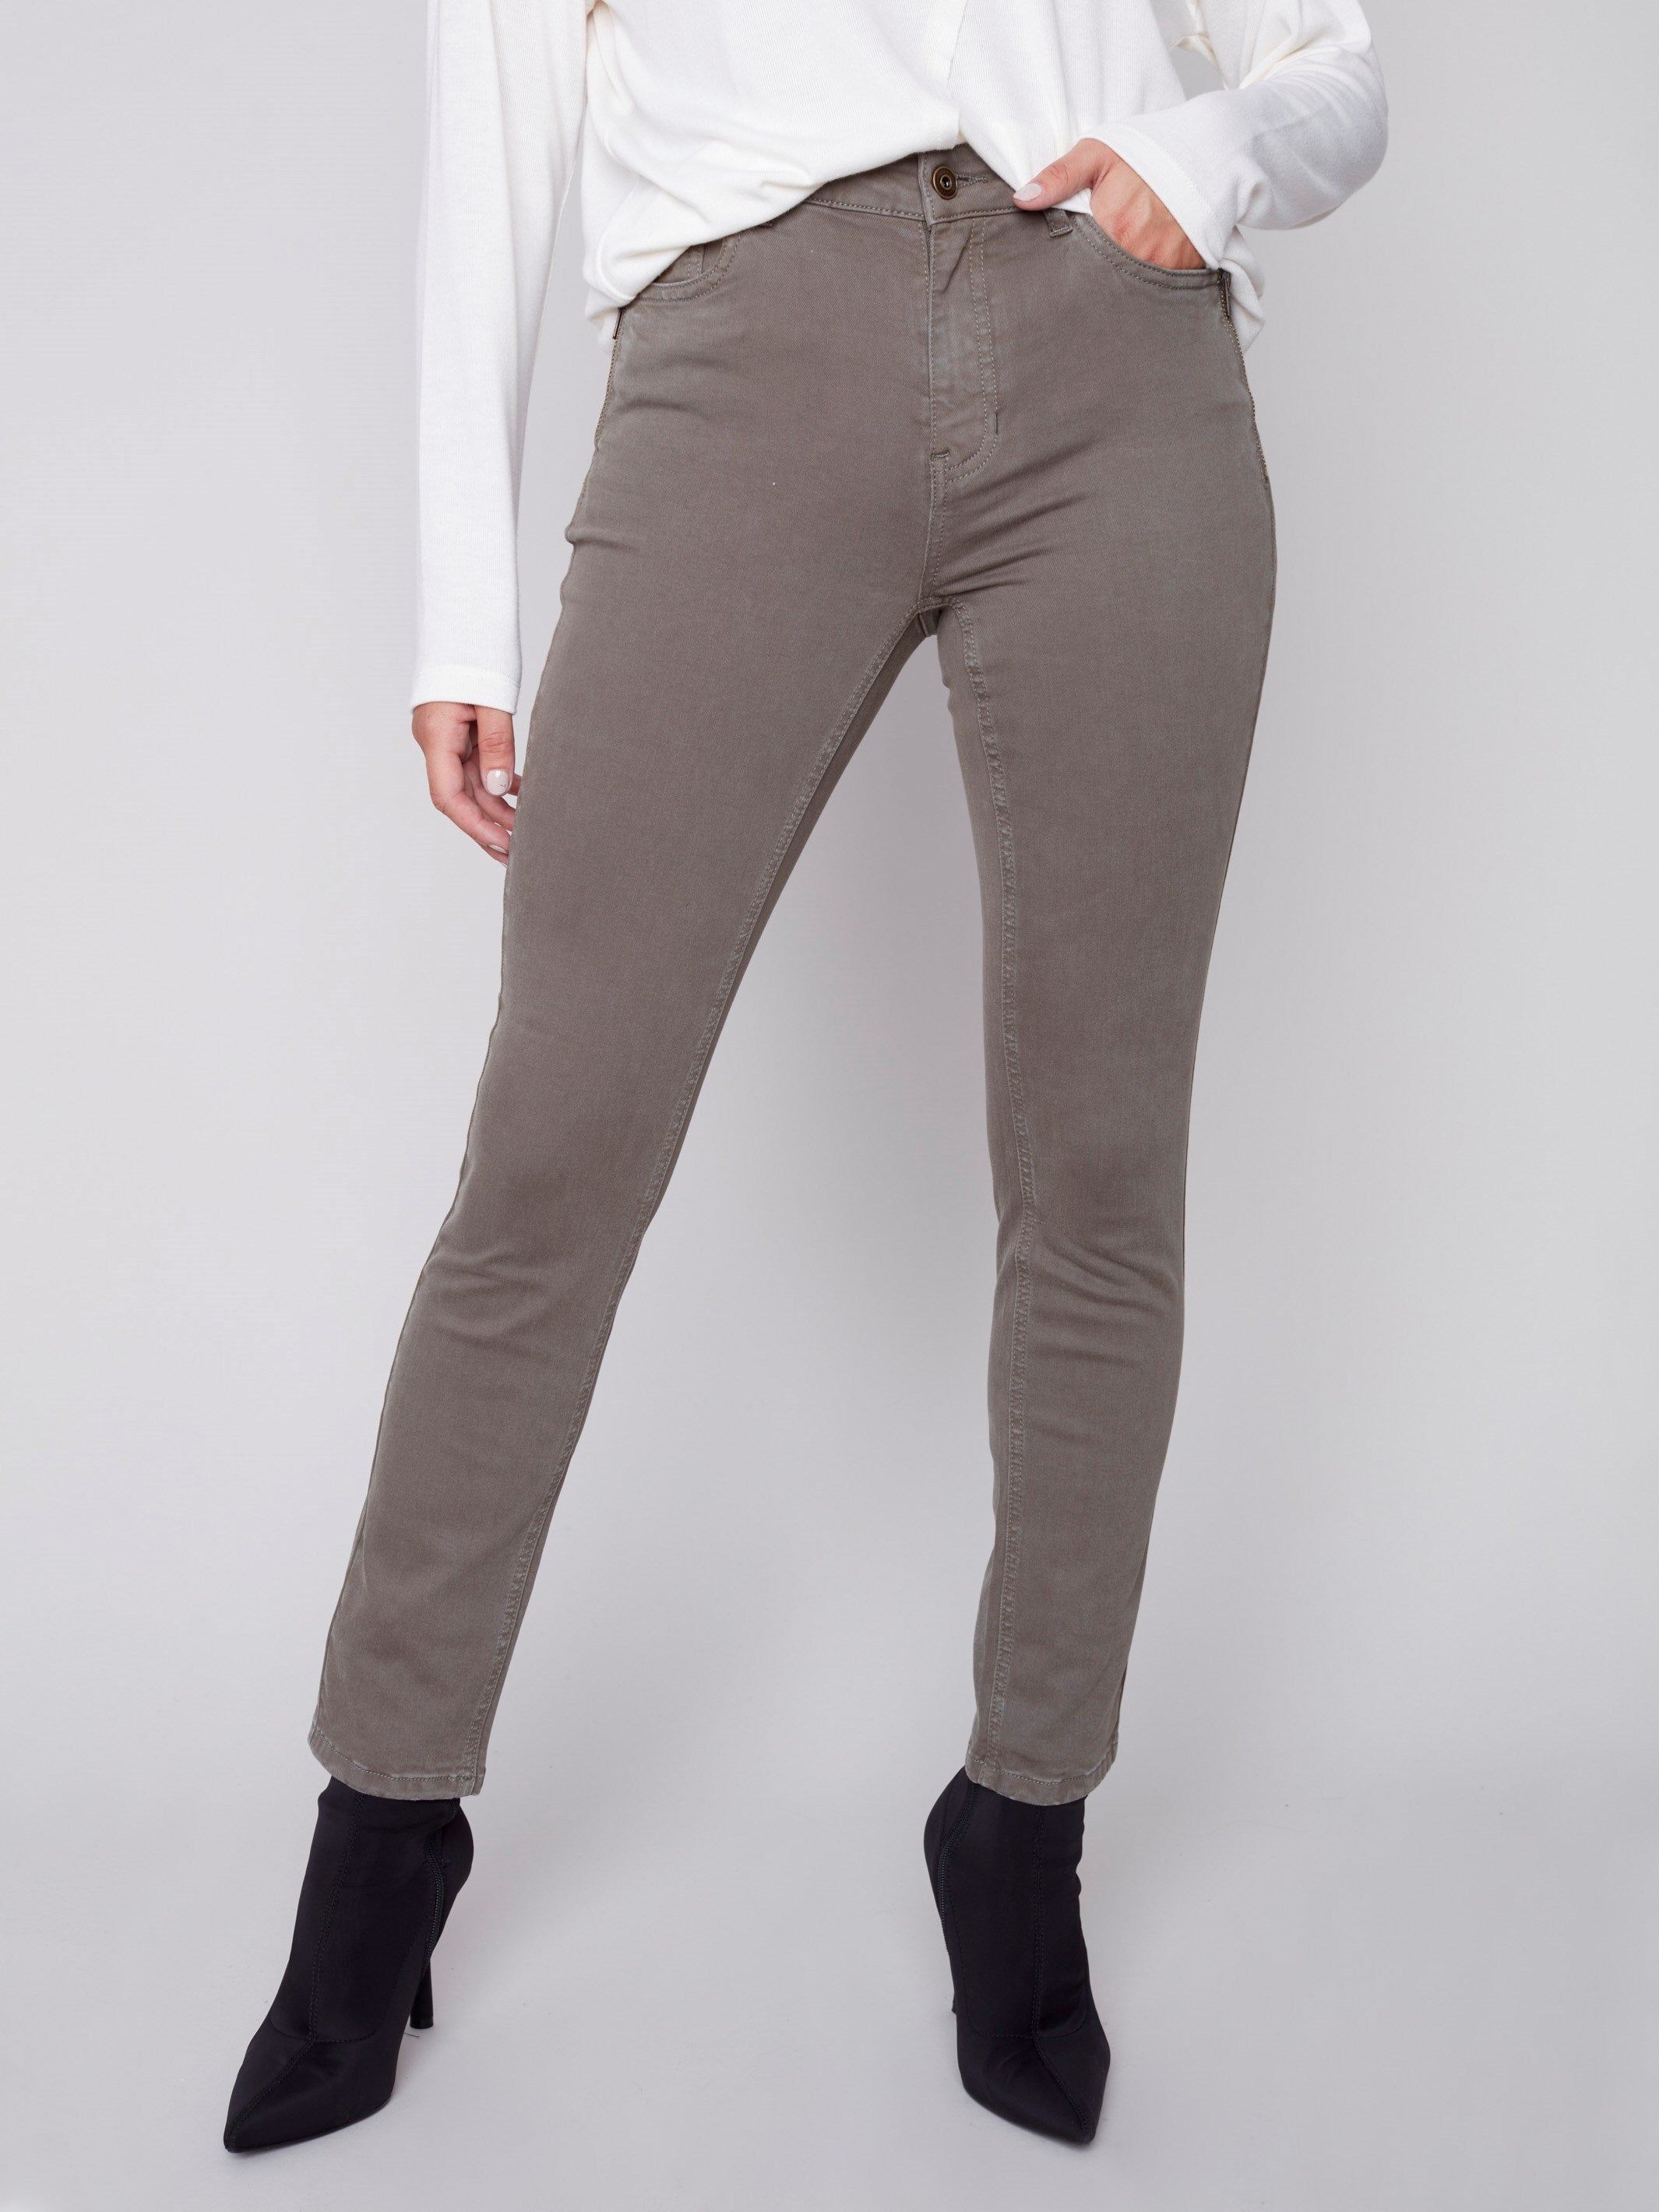 Twill Pants with Zipper Pocket Detail - Spruce